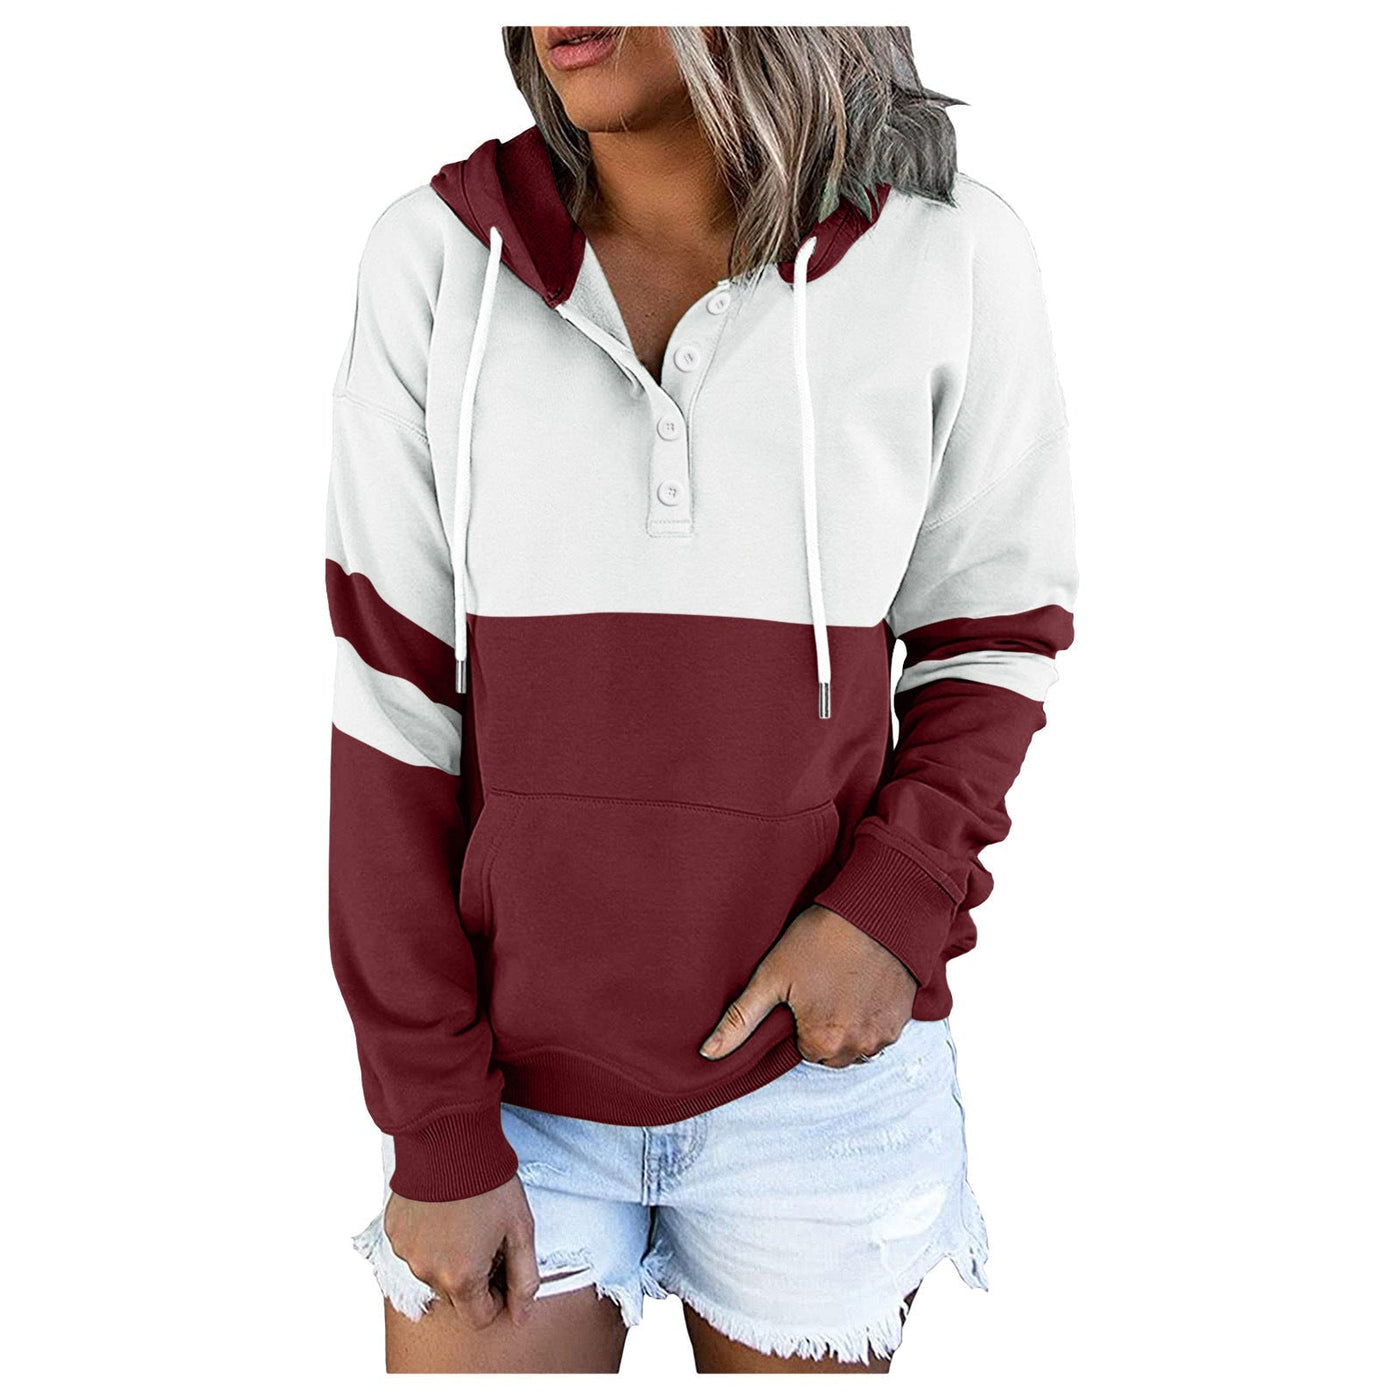 NTG Textile S / Wine Red Stitching Hooded Pockets